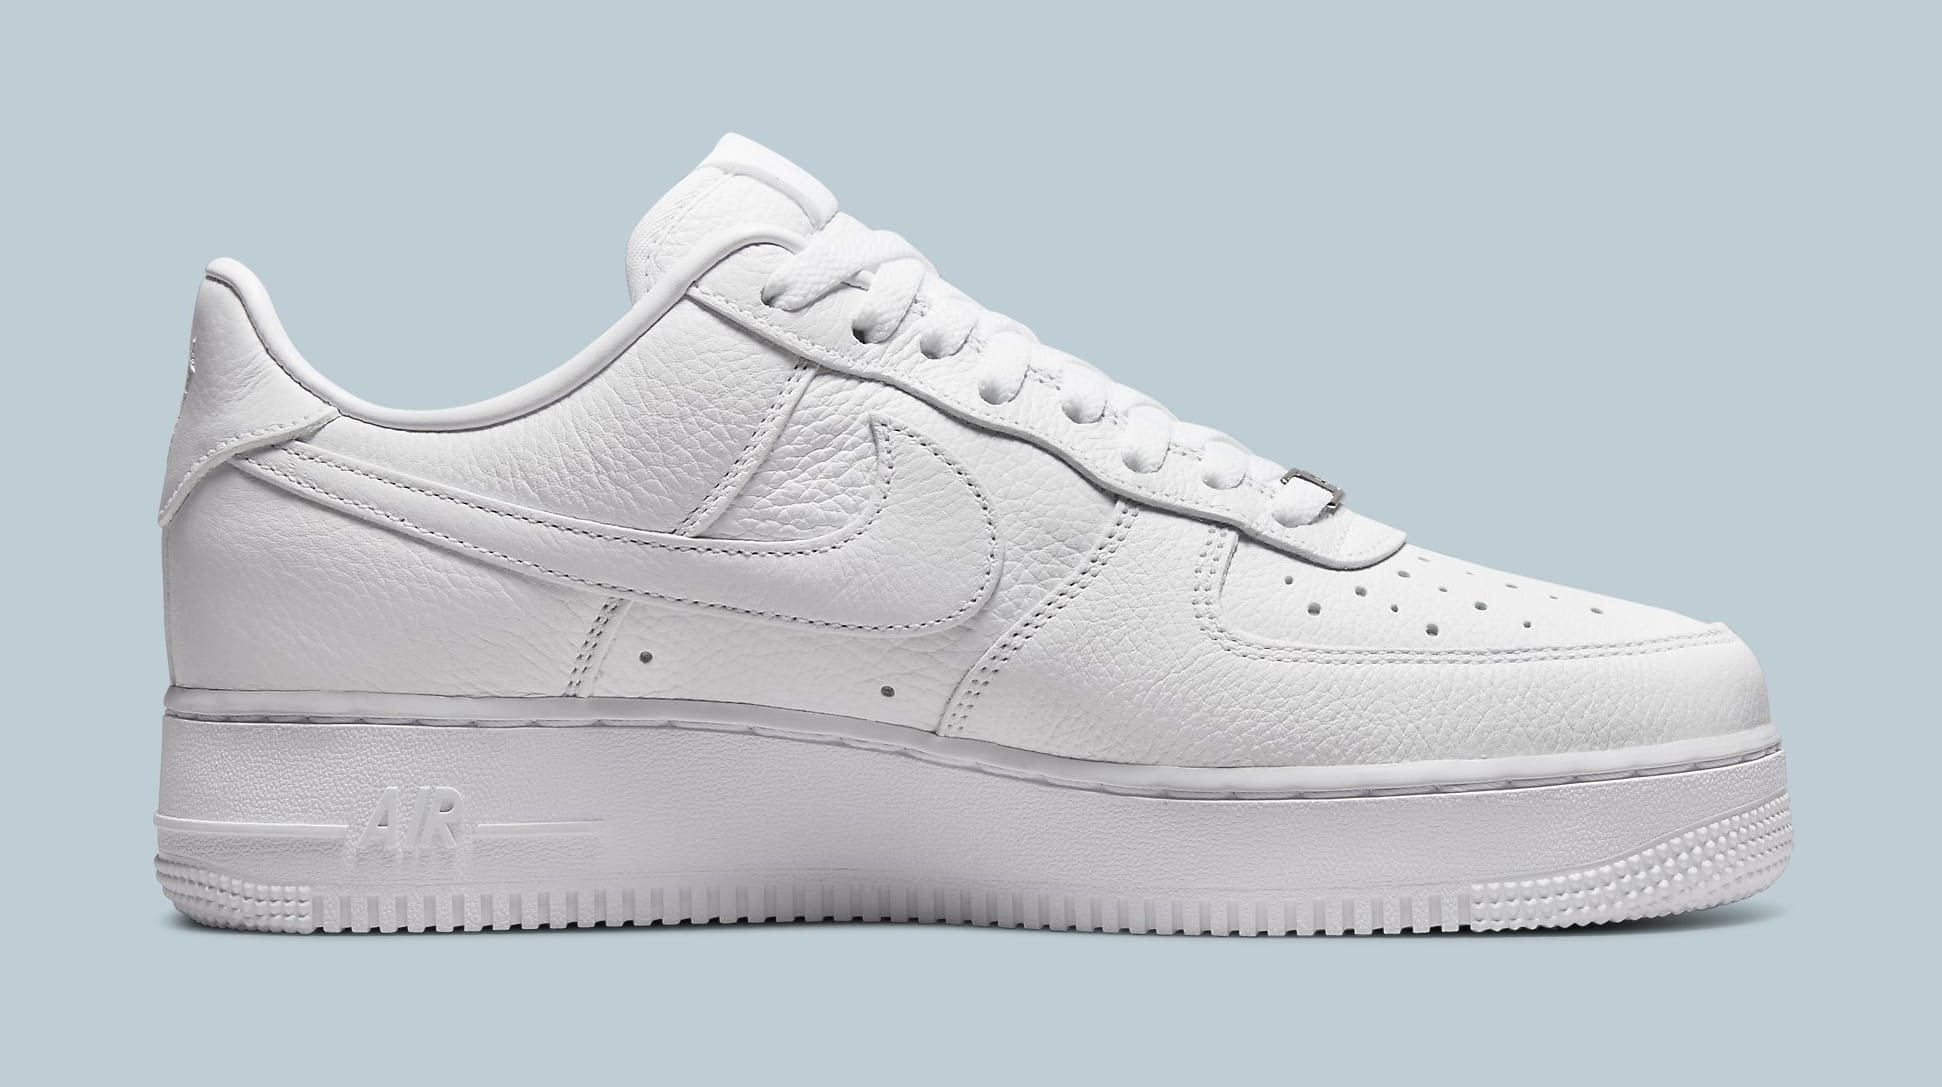 Nocta x Nike Air Force 1 Low CZ8065 100 Medial